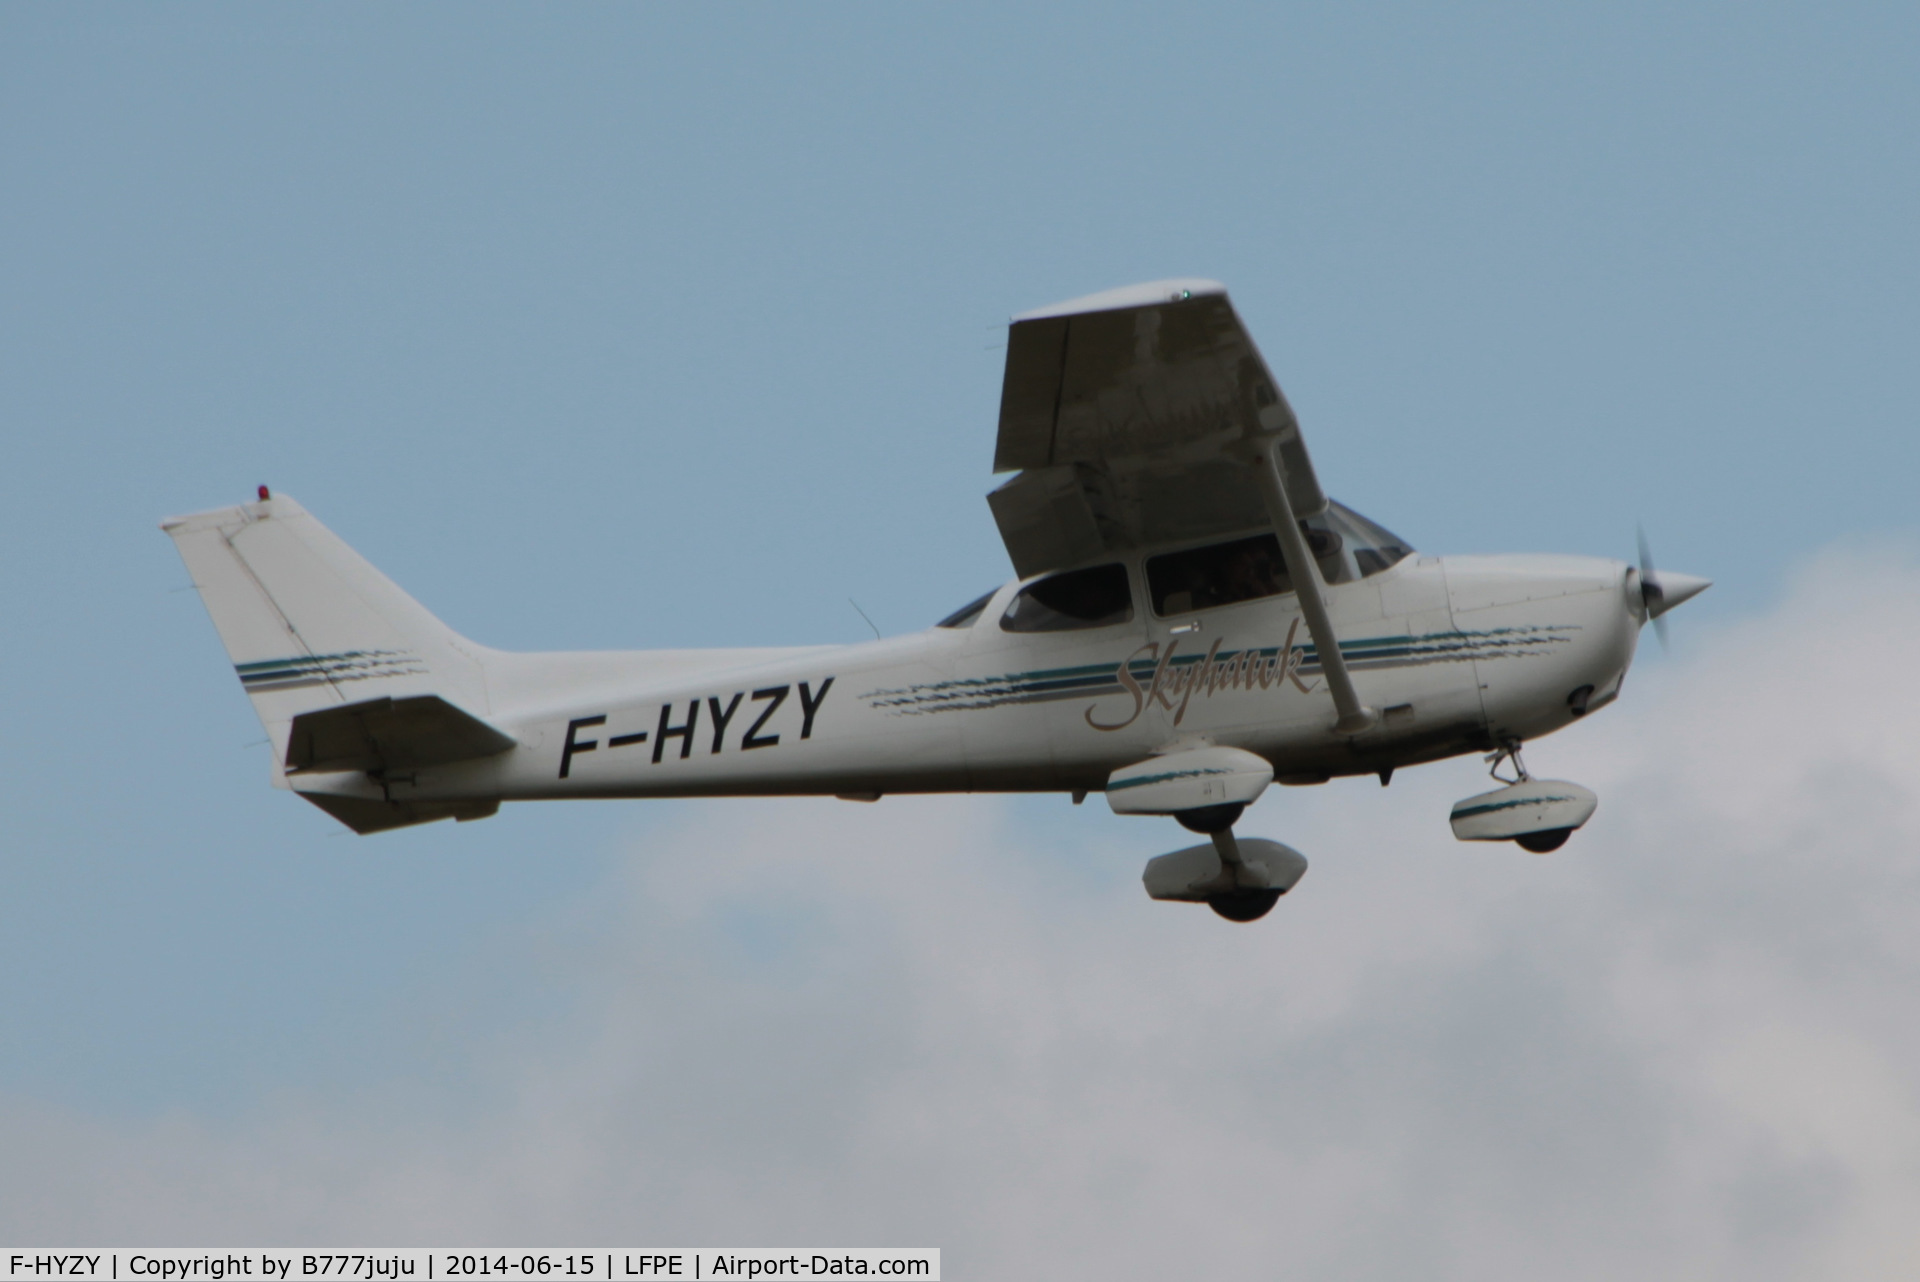 F-HYZY, 1998 Cessna 172R C/N 17280419, at Meaux